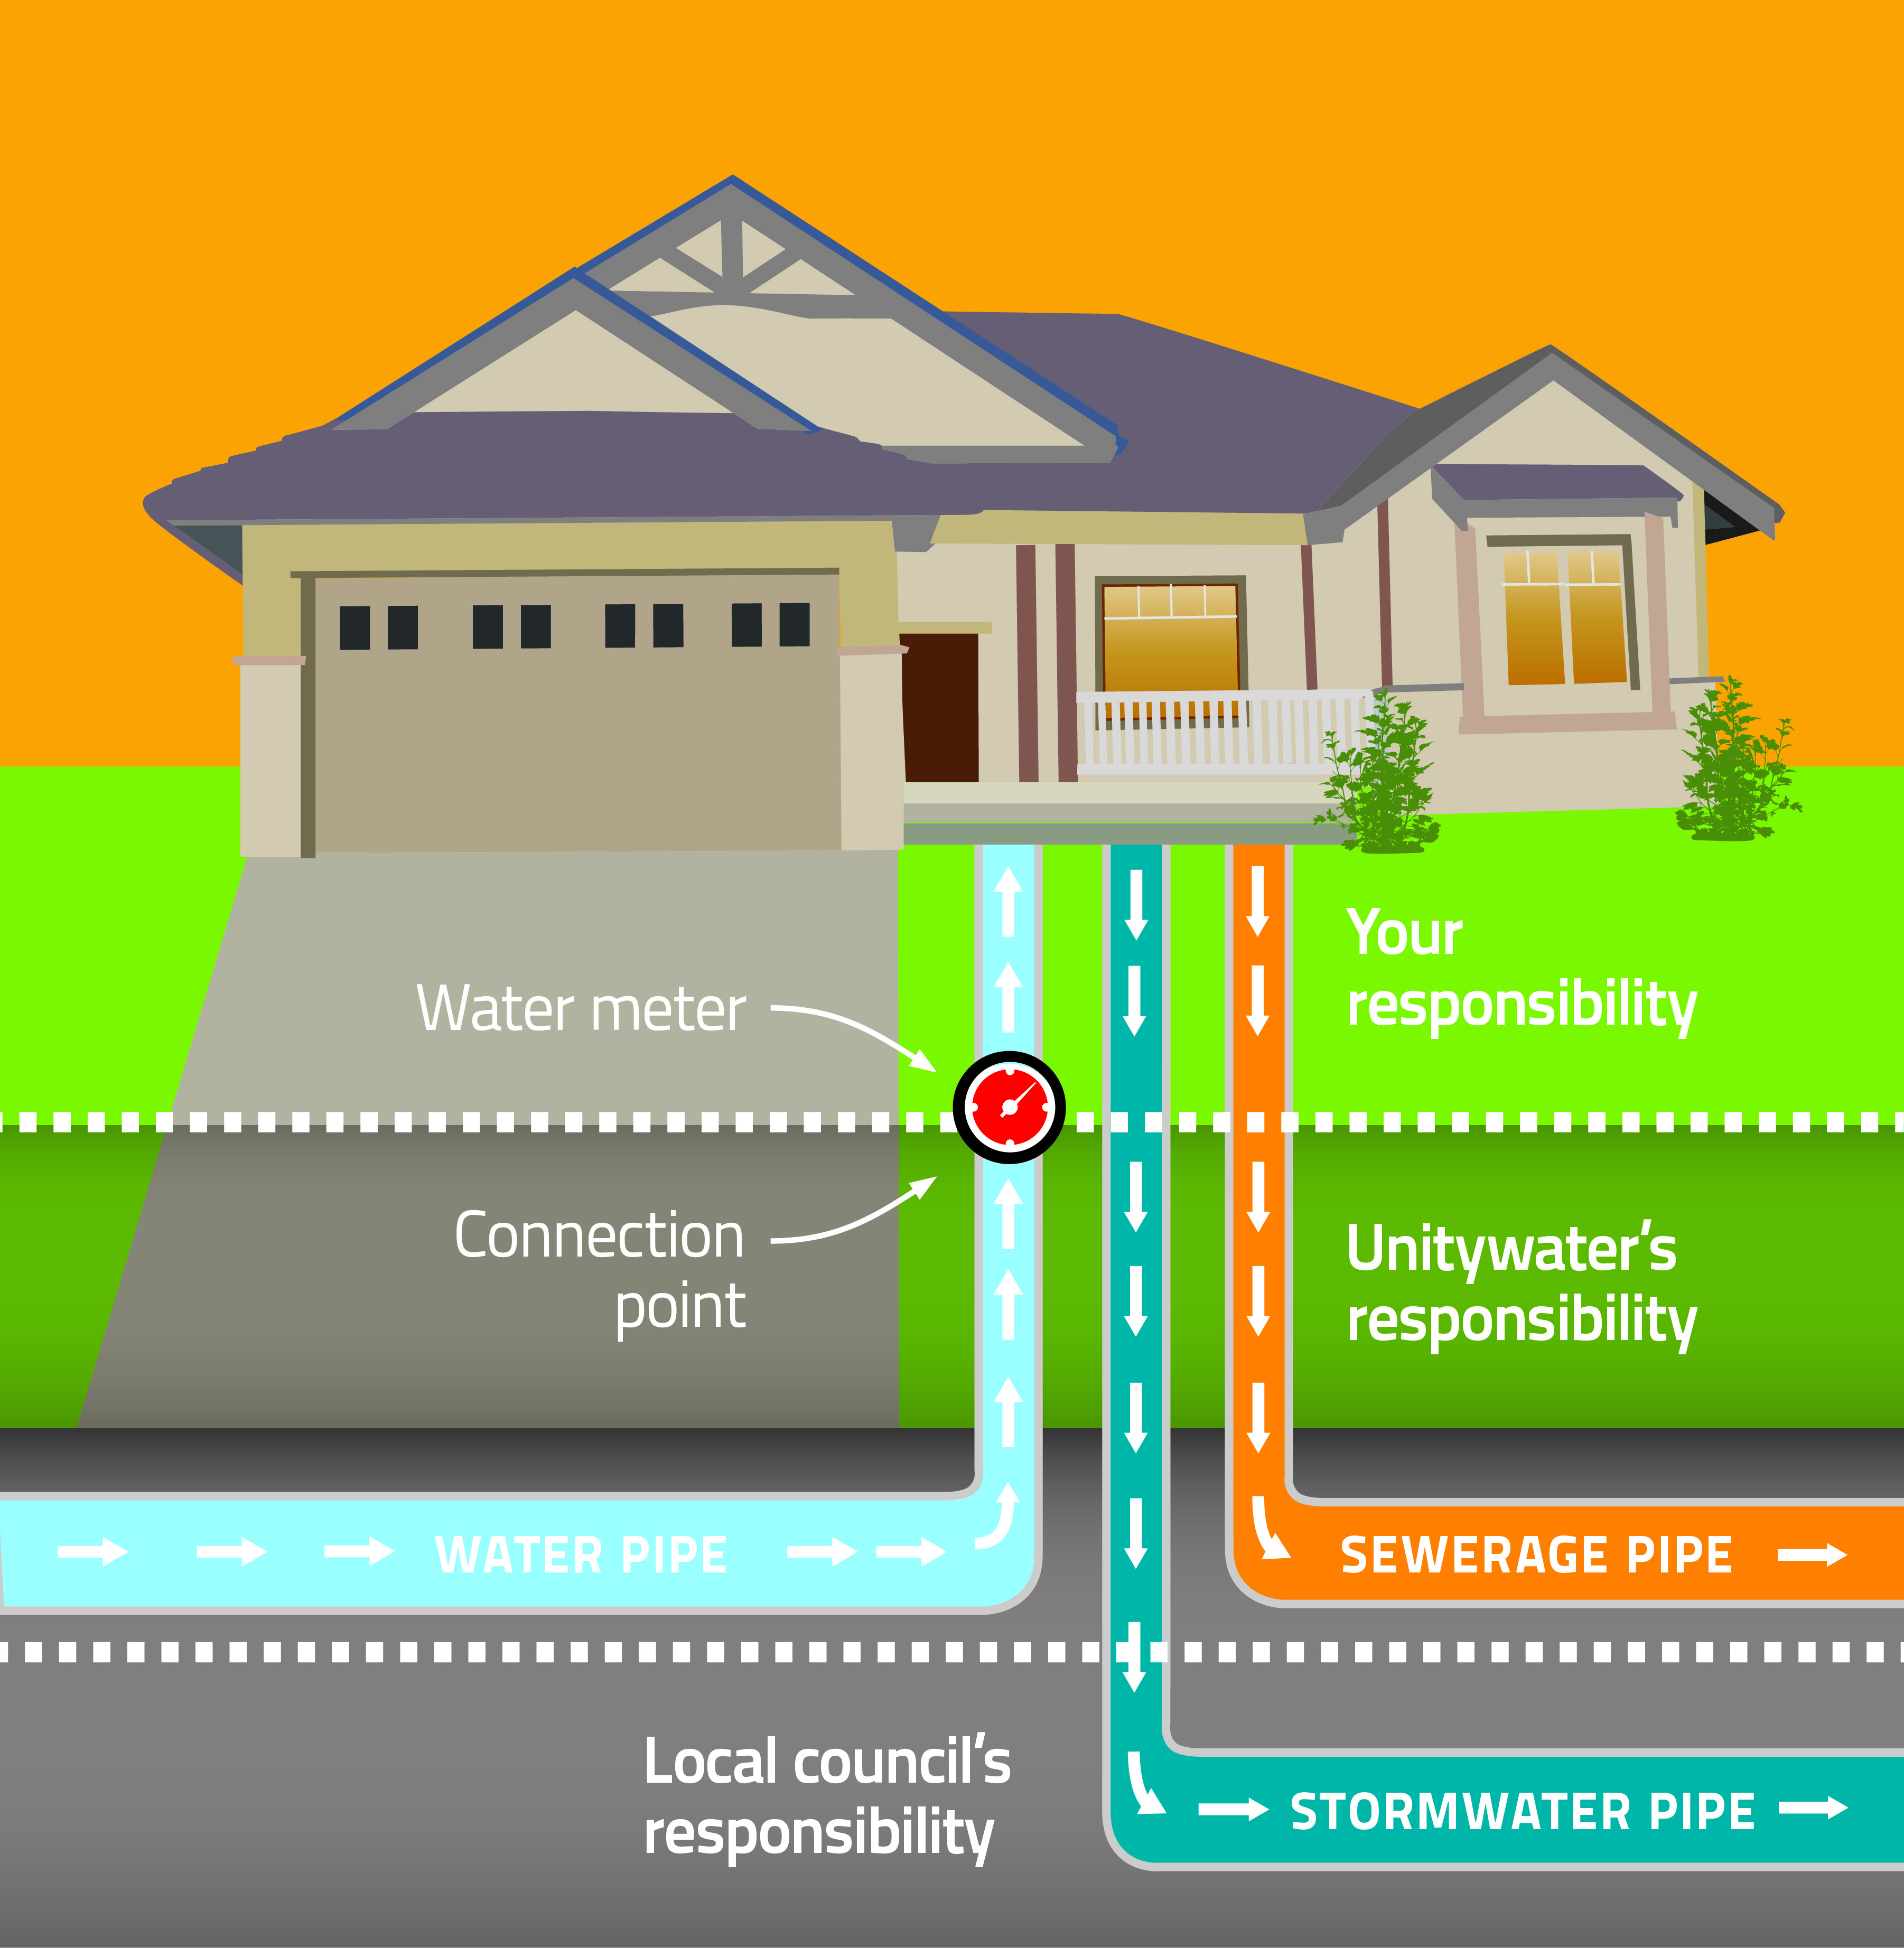 Water and sewage pipe responsibility diagram